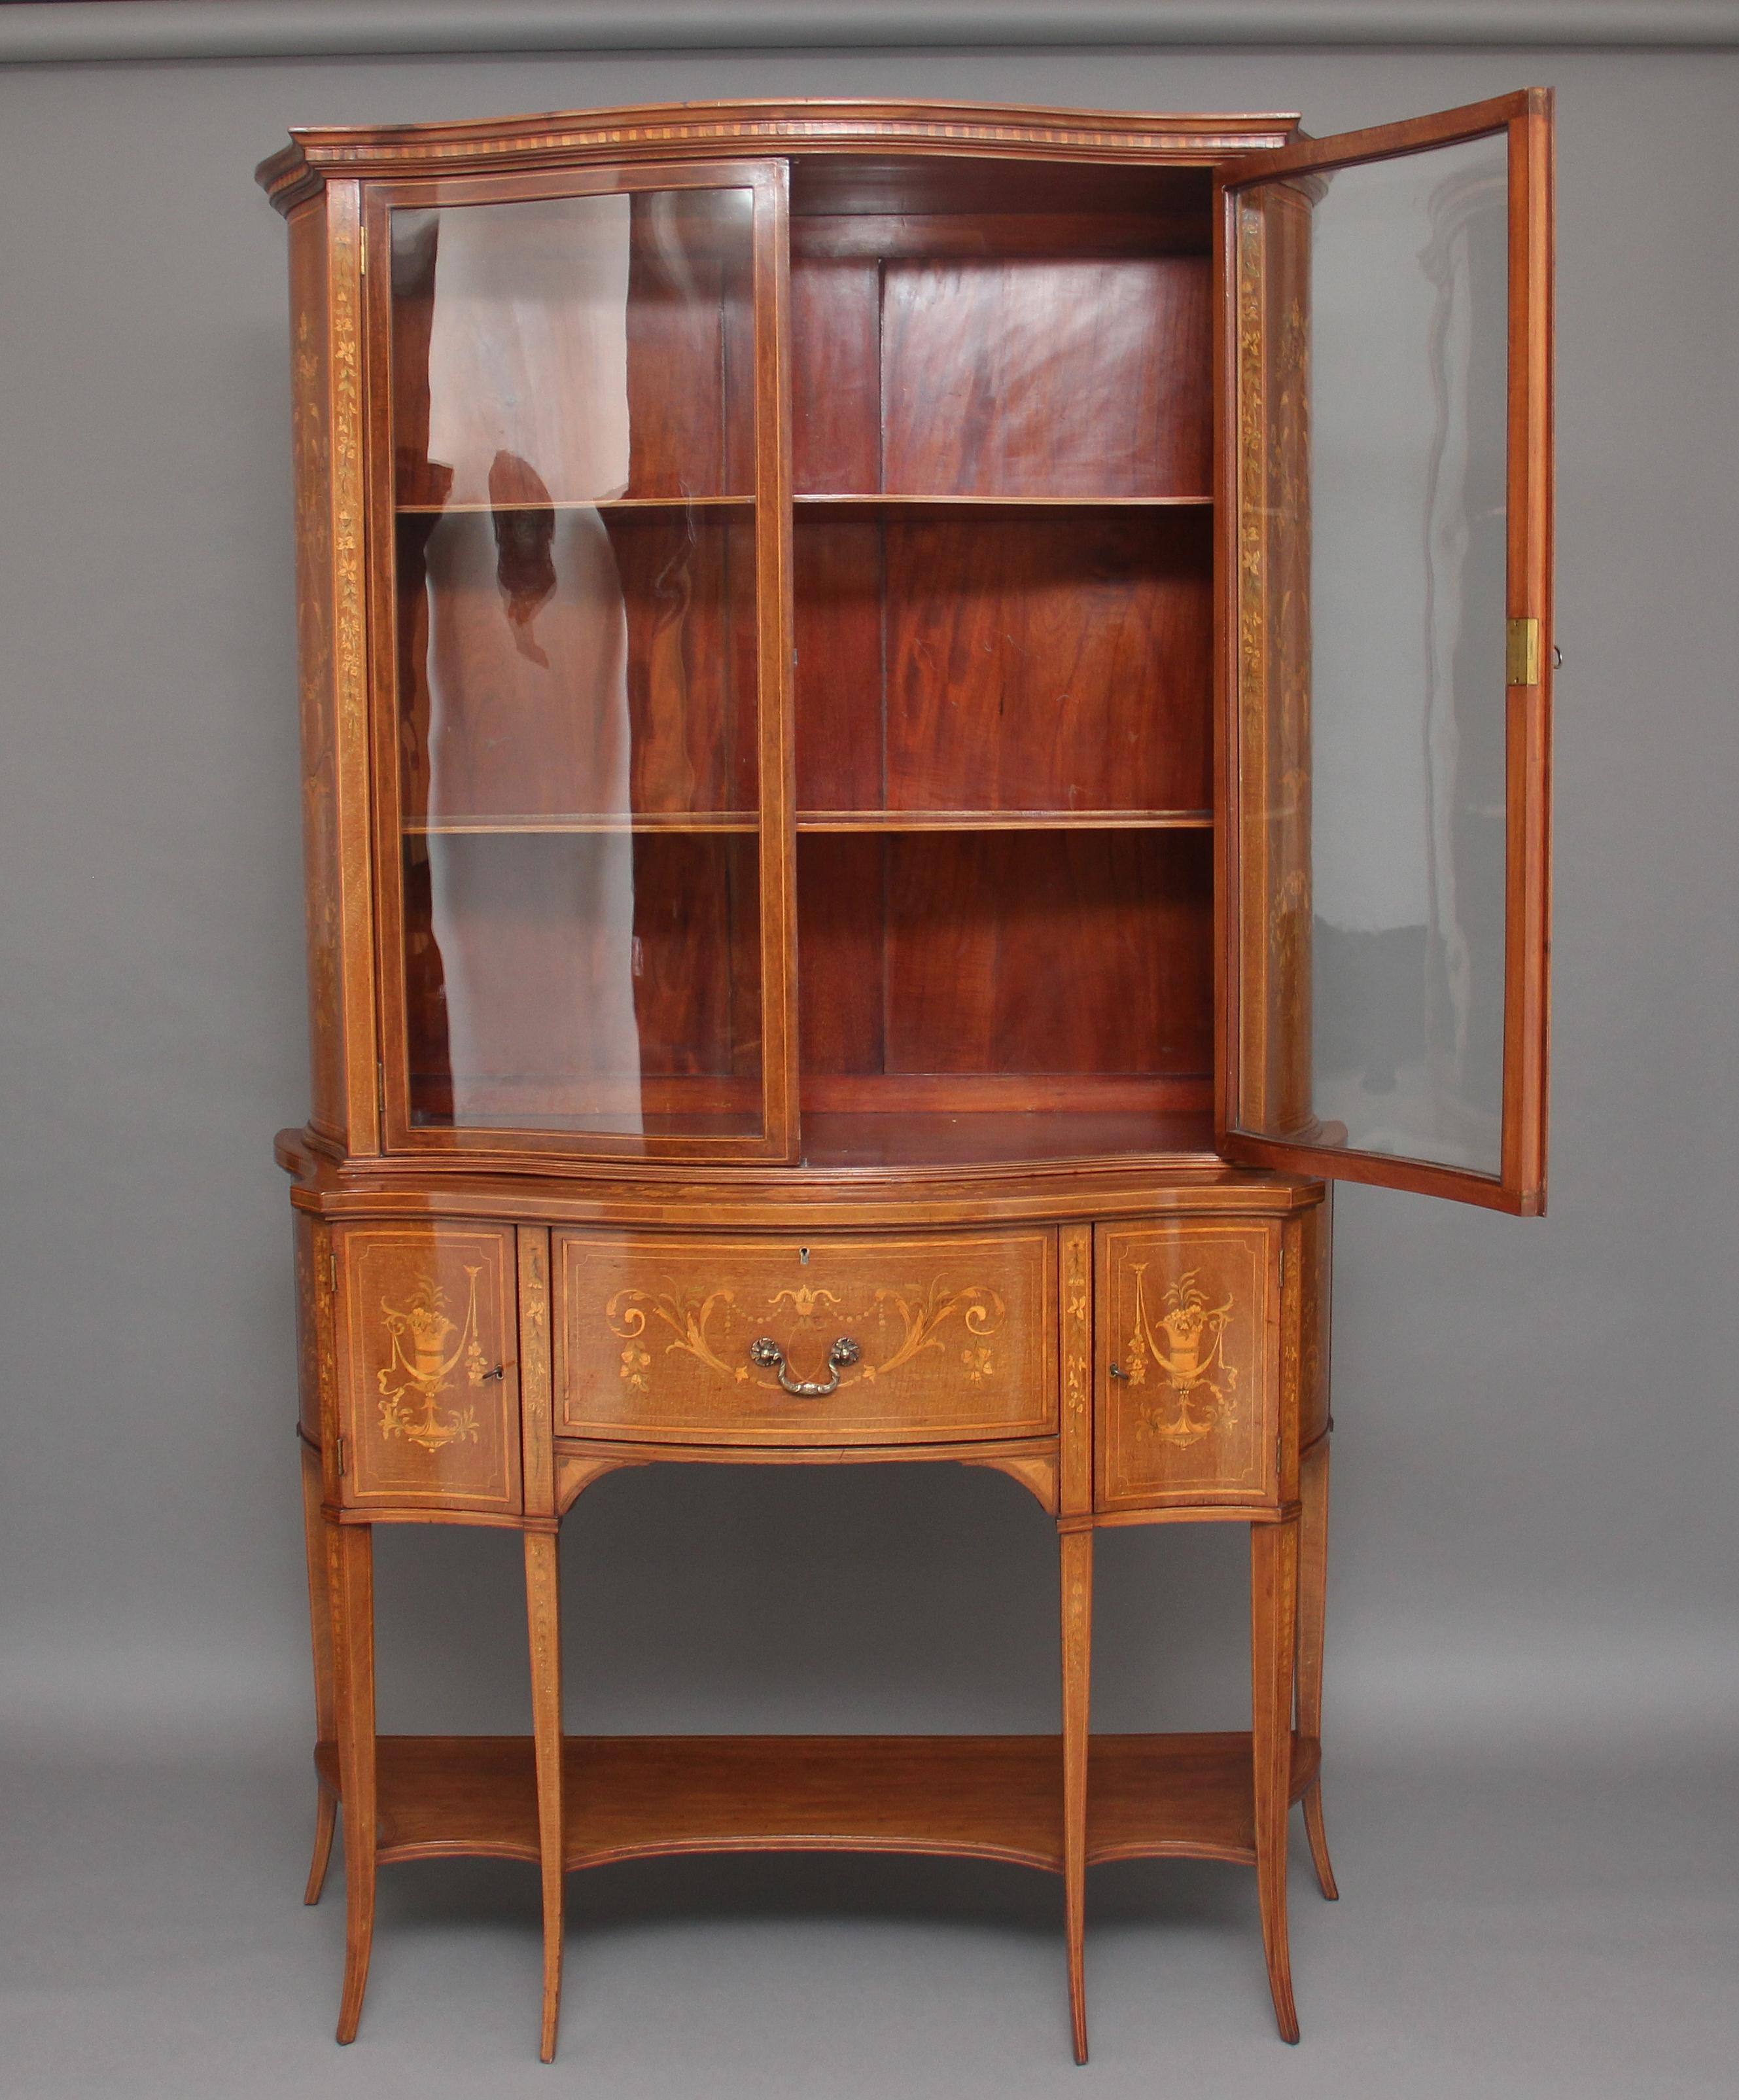 19th Century Mahogany Inlaid Display Cabinet In Good Condition For Sale In Martlesham, GB